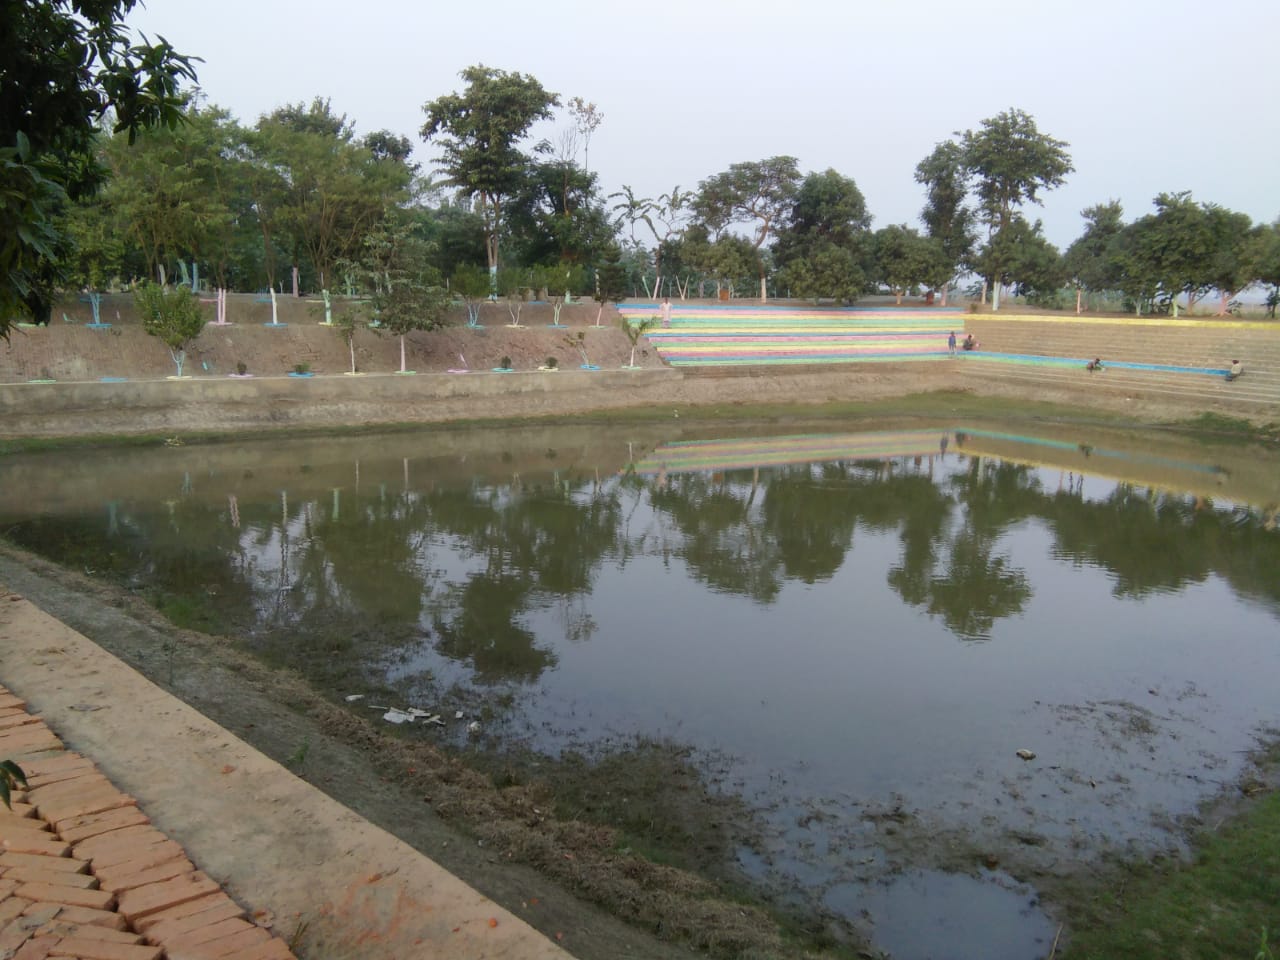 Excess water in the canal is diverted to the pond